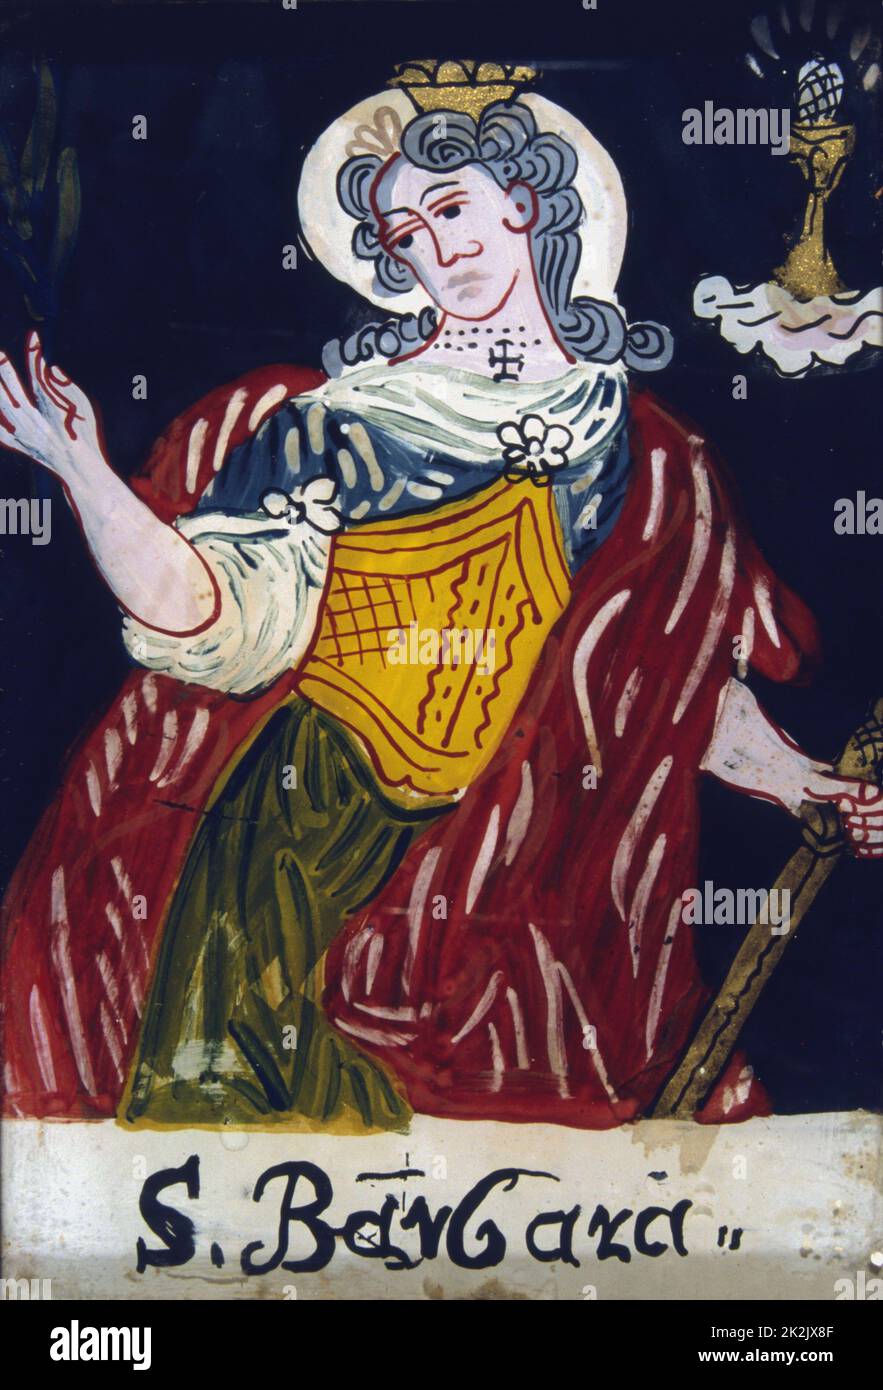 St Barbara. Christian virgin martyr. Her symbol of a tower, top right. Anonymous 19th century painting. Stock Photo